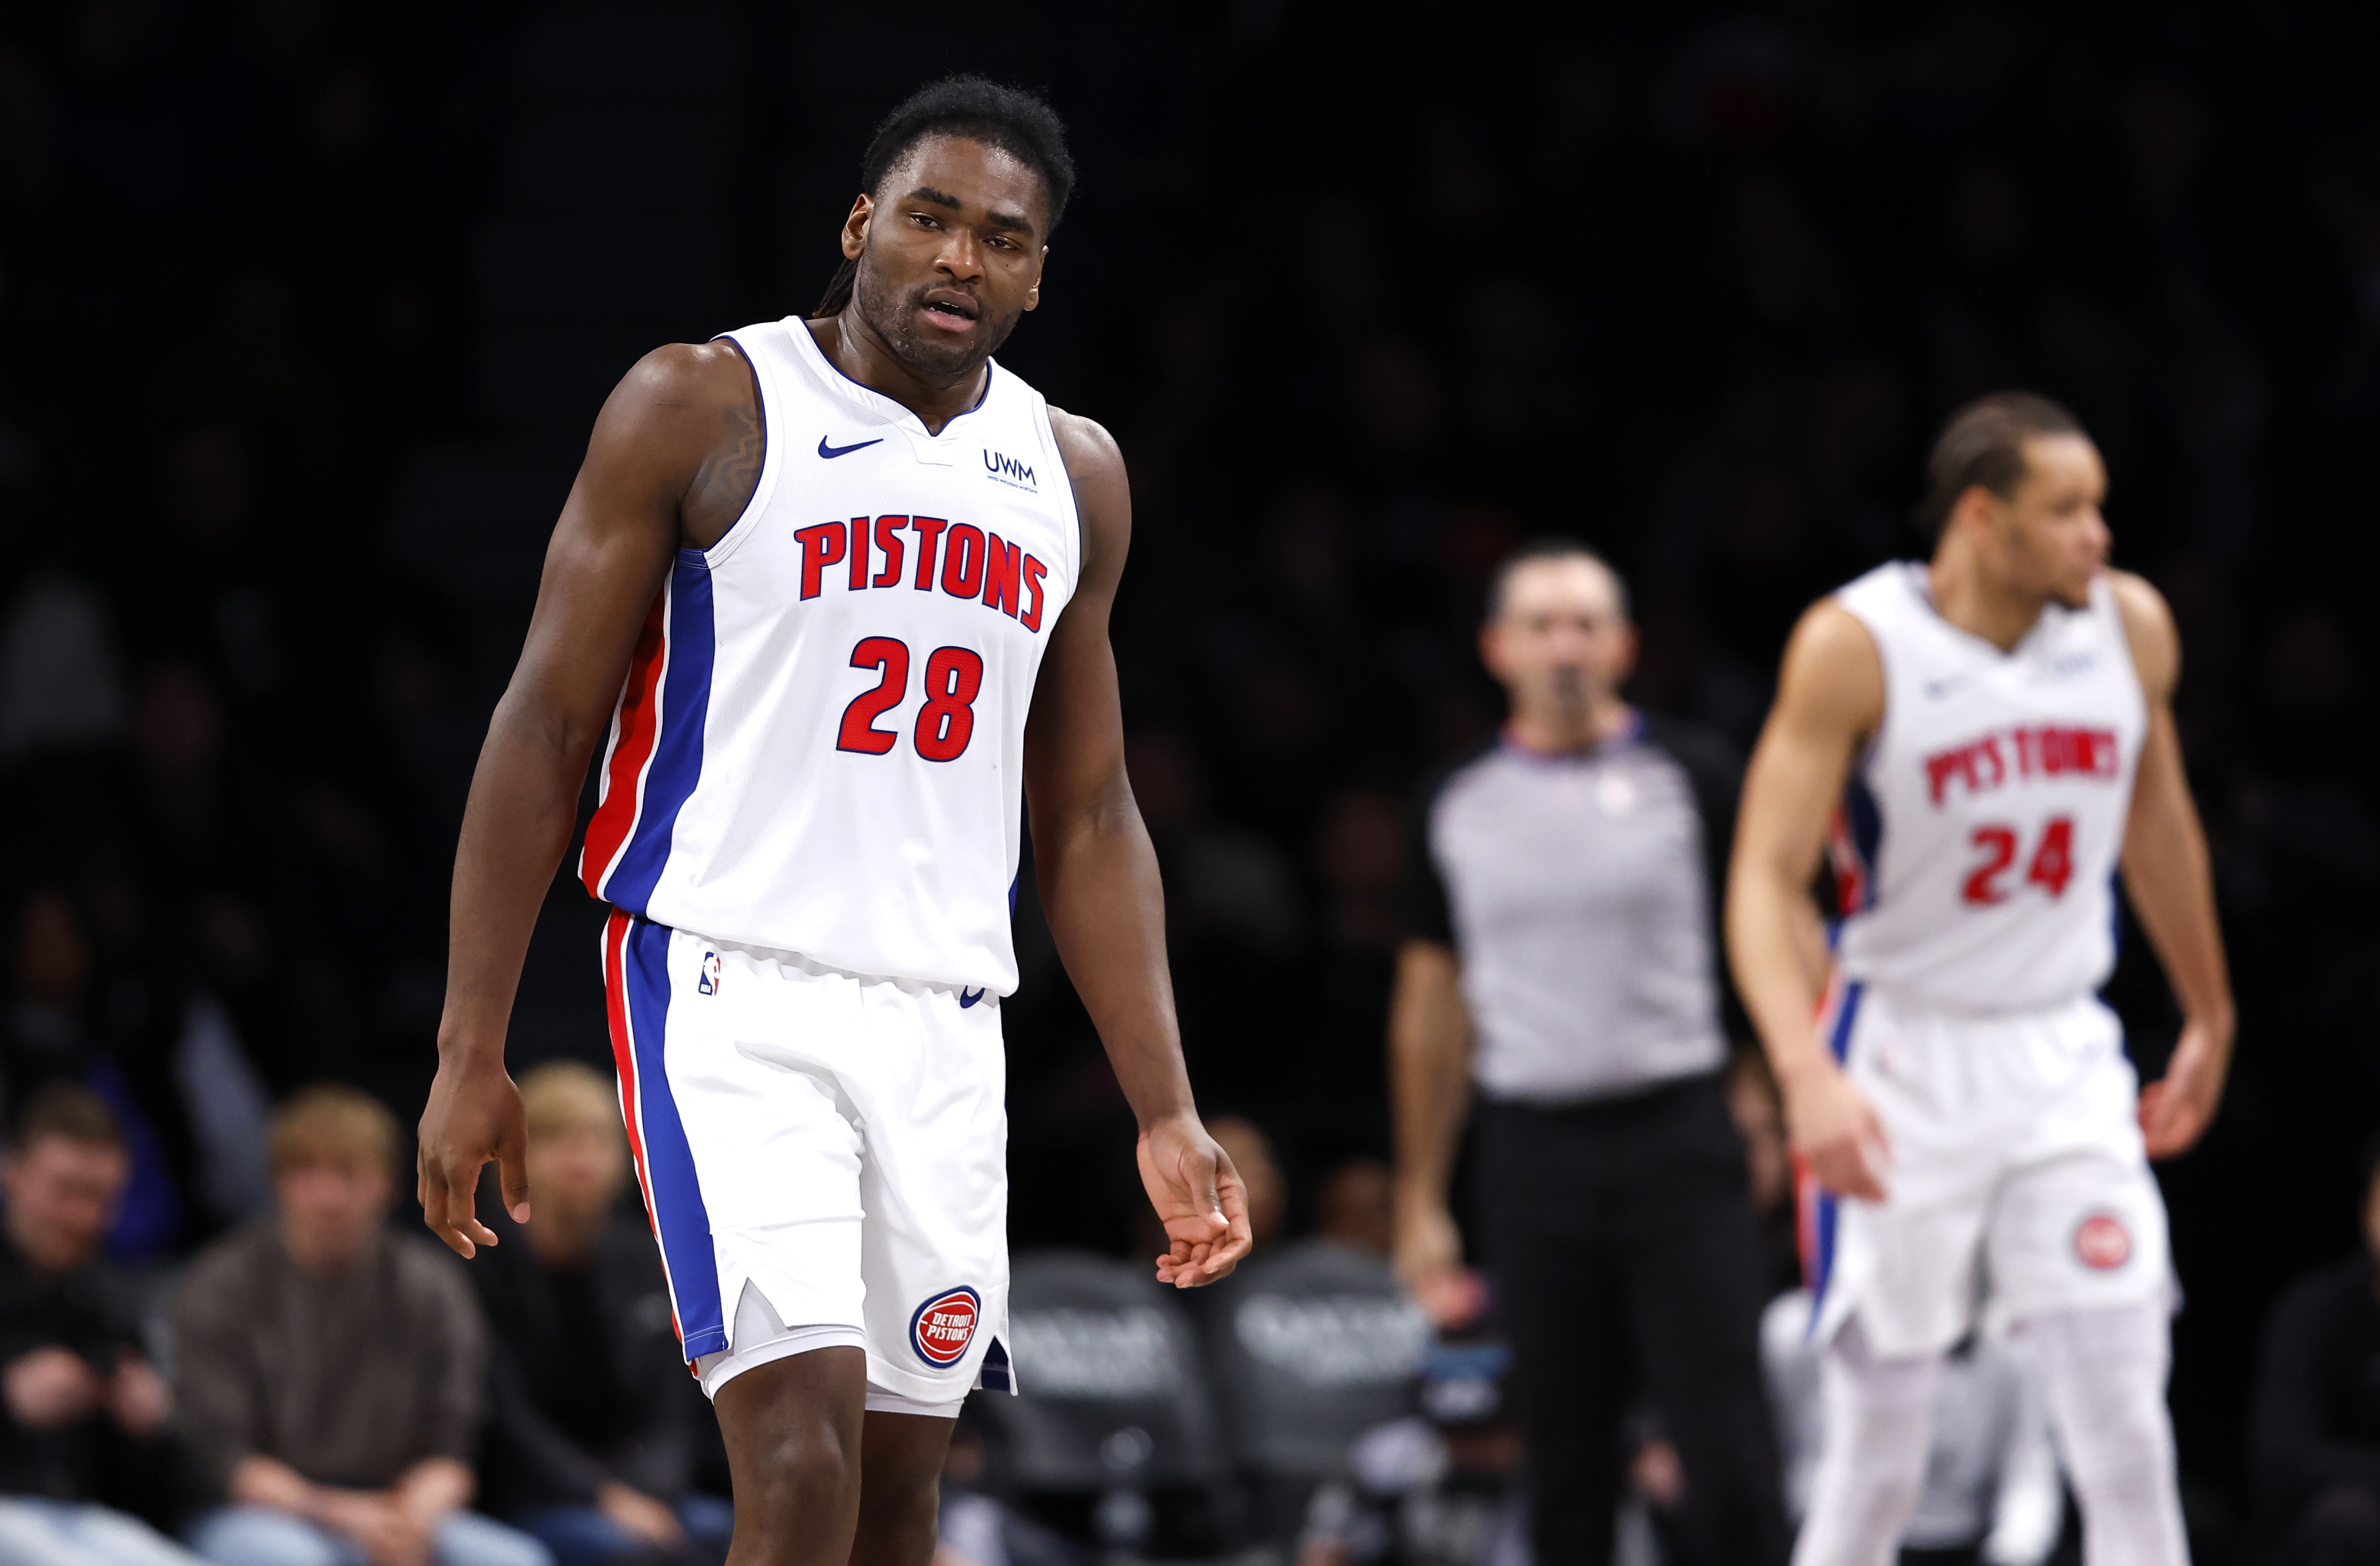 Pistons match NBA single-season record with 26th straight loss, fall  126-115 to the Nets